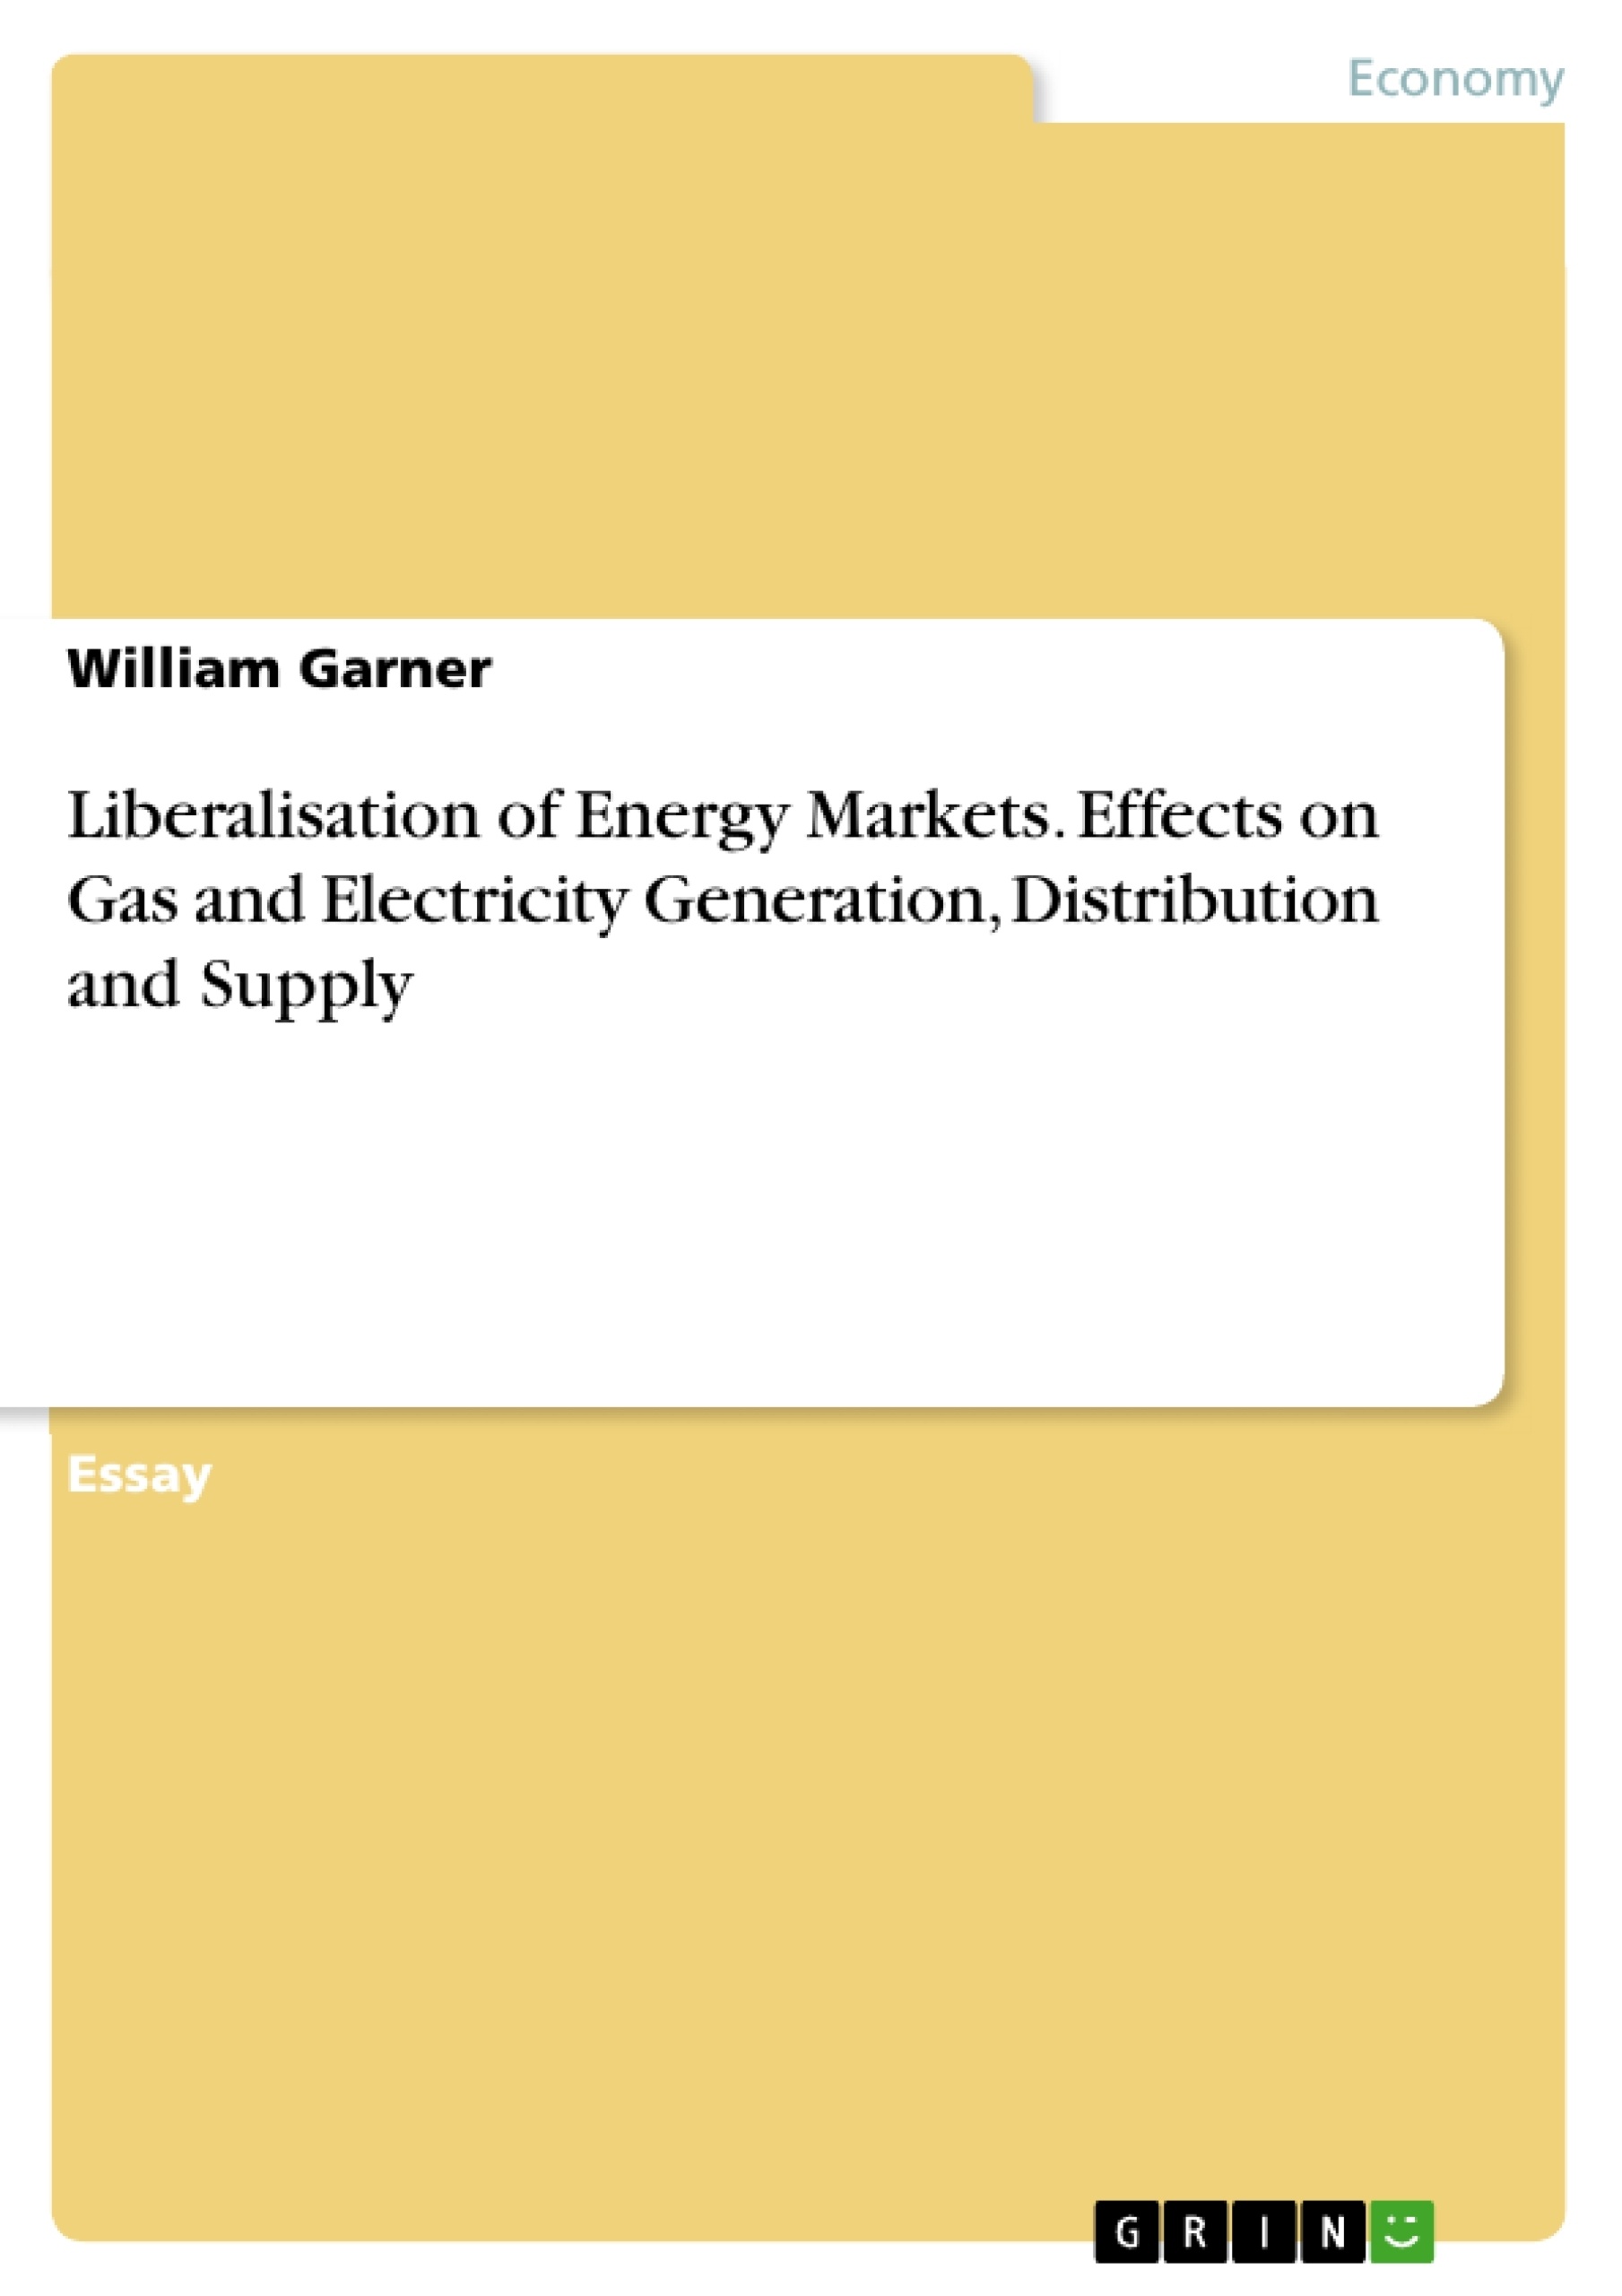 Title: Liberalisation of Energy Markets. Effects on Gas and Electricity Generation, Distribution and Supply